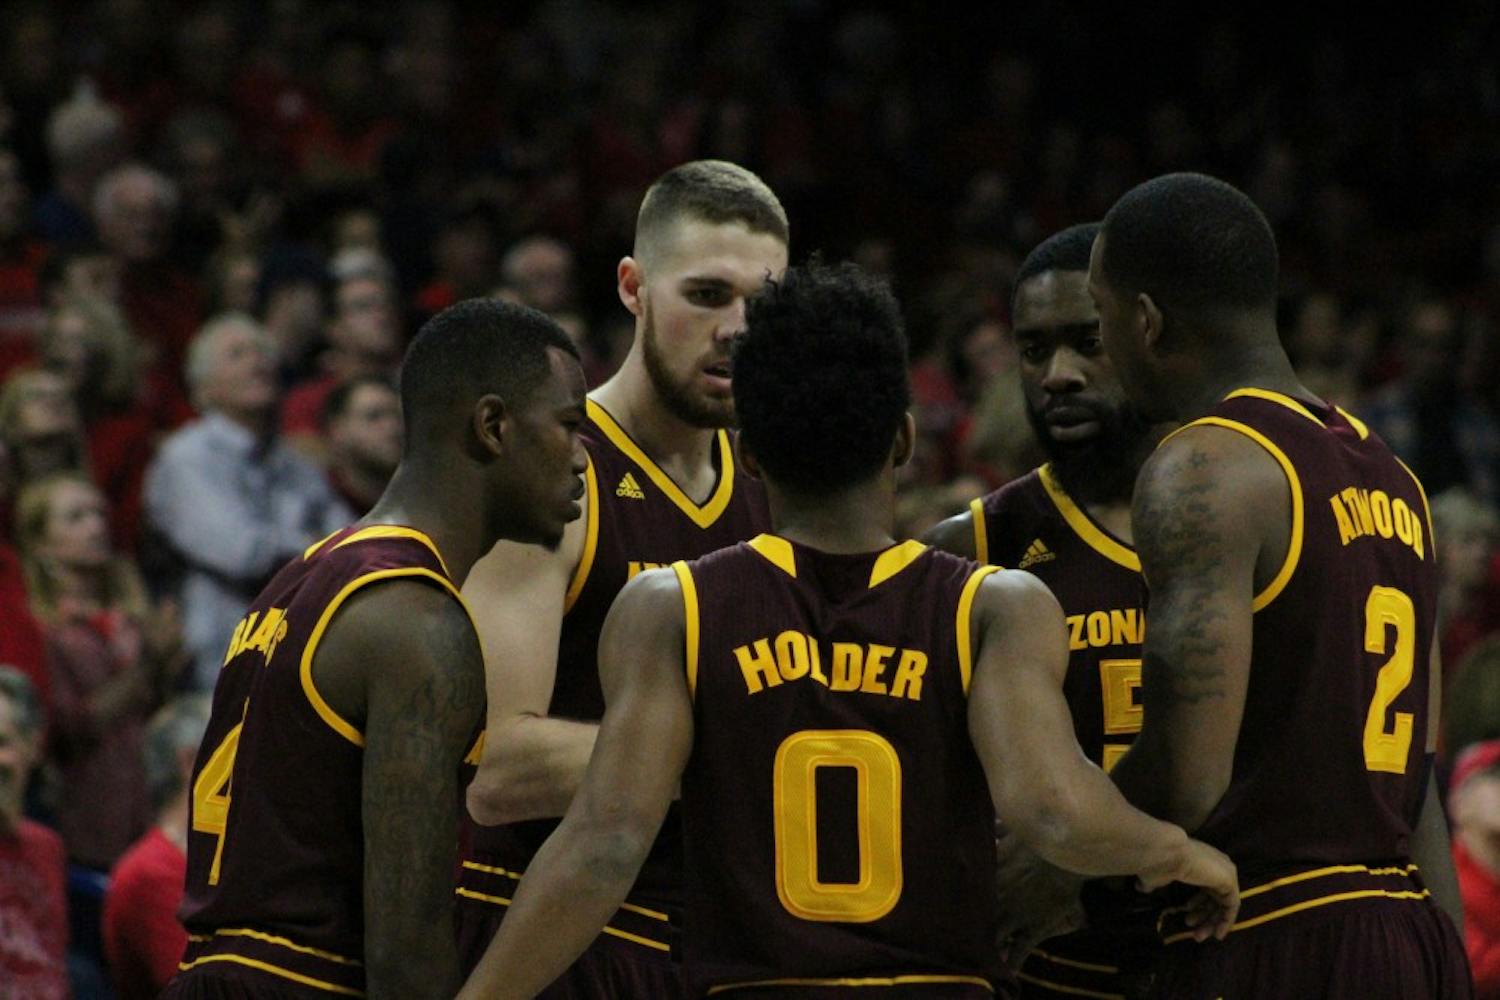 ASU men's basketball's starting five huddles before the opening tip versus Arizona on Wednesday, Feb. 17 at&nbsp;the McKale Center in Tucson.&nbsp;The Wildcats topped the Sun Devils 99-61.